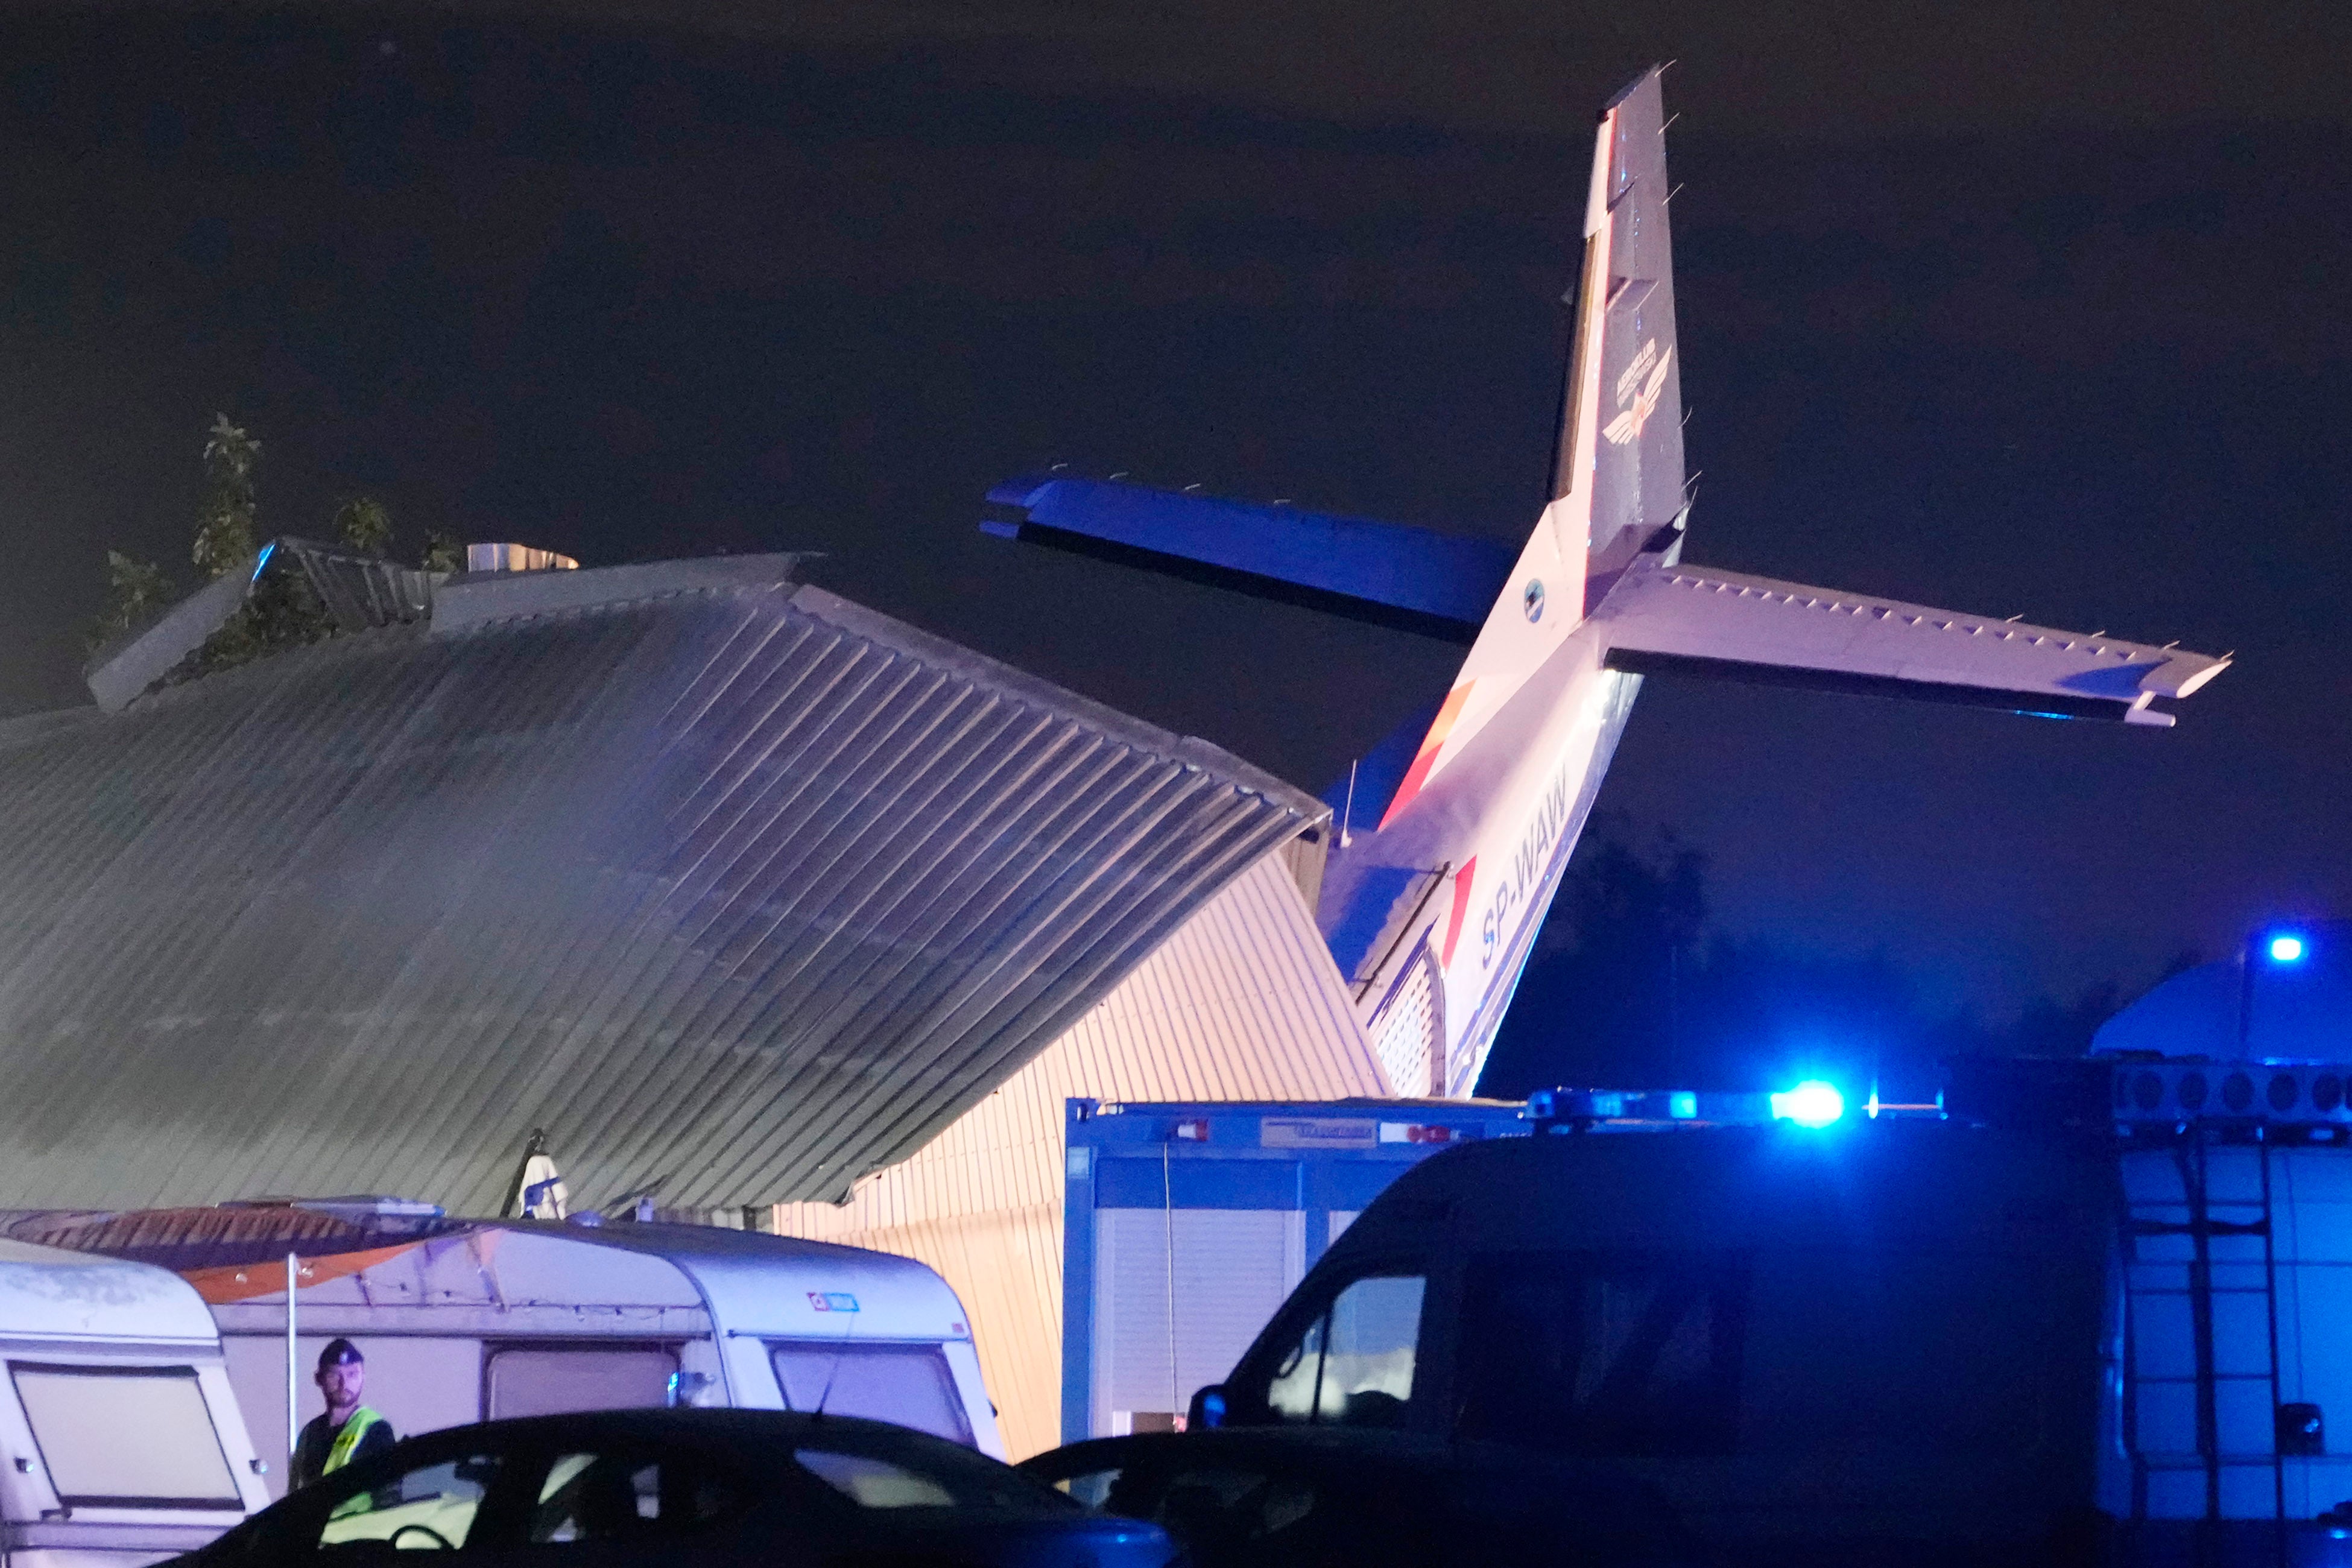 5 people killed and 5 injured in Poland when a small plane crashes into a hangar during bad weather The Independent